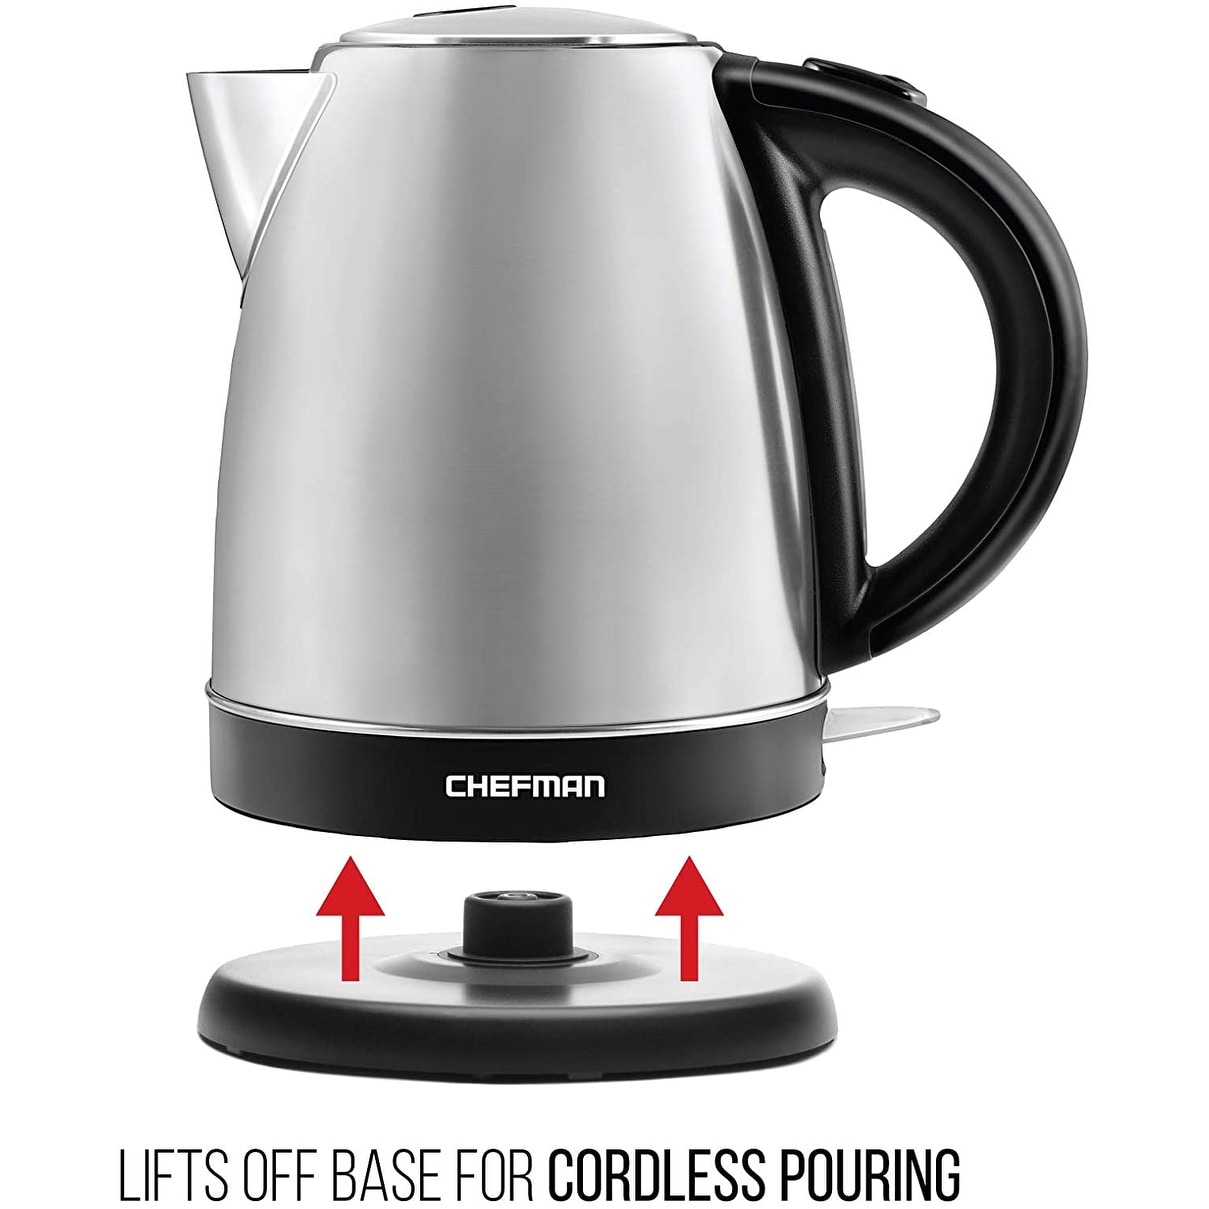 Chefman Stainless Steel Electric Hot Water Pot with Safety Lock